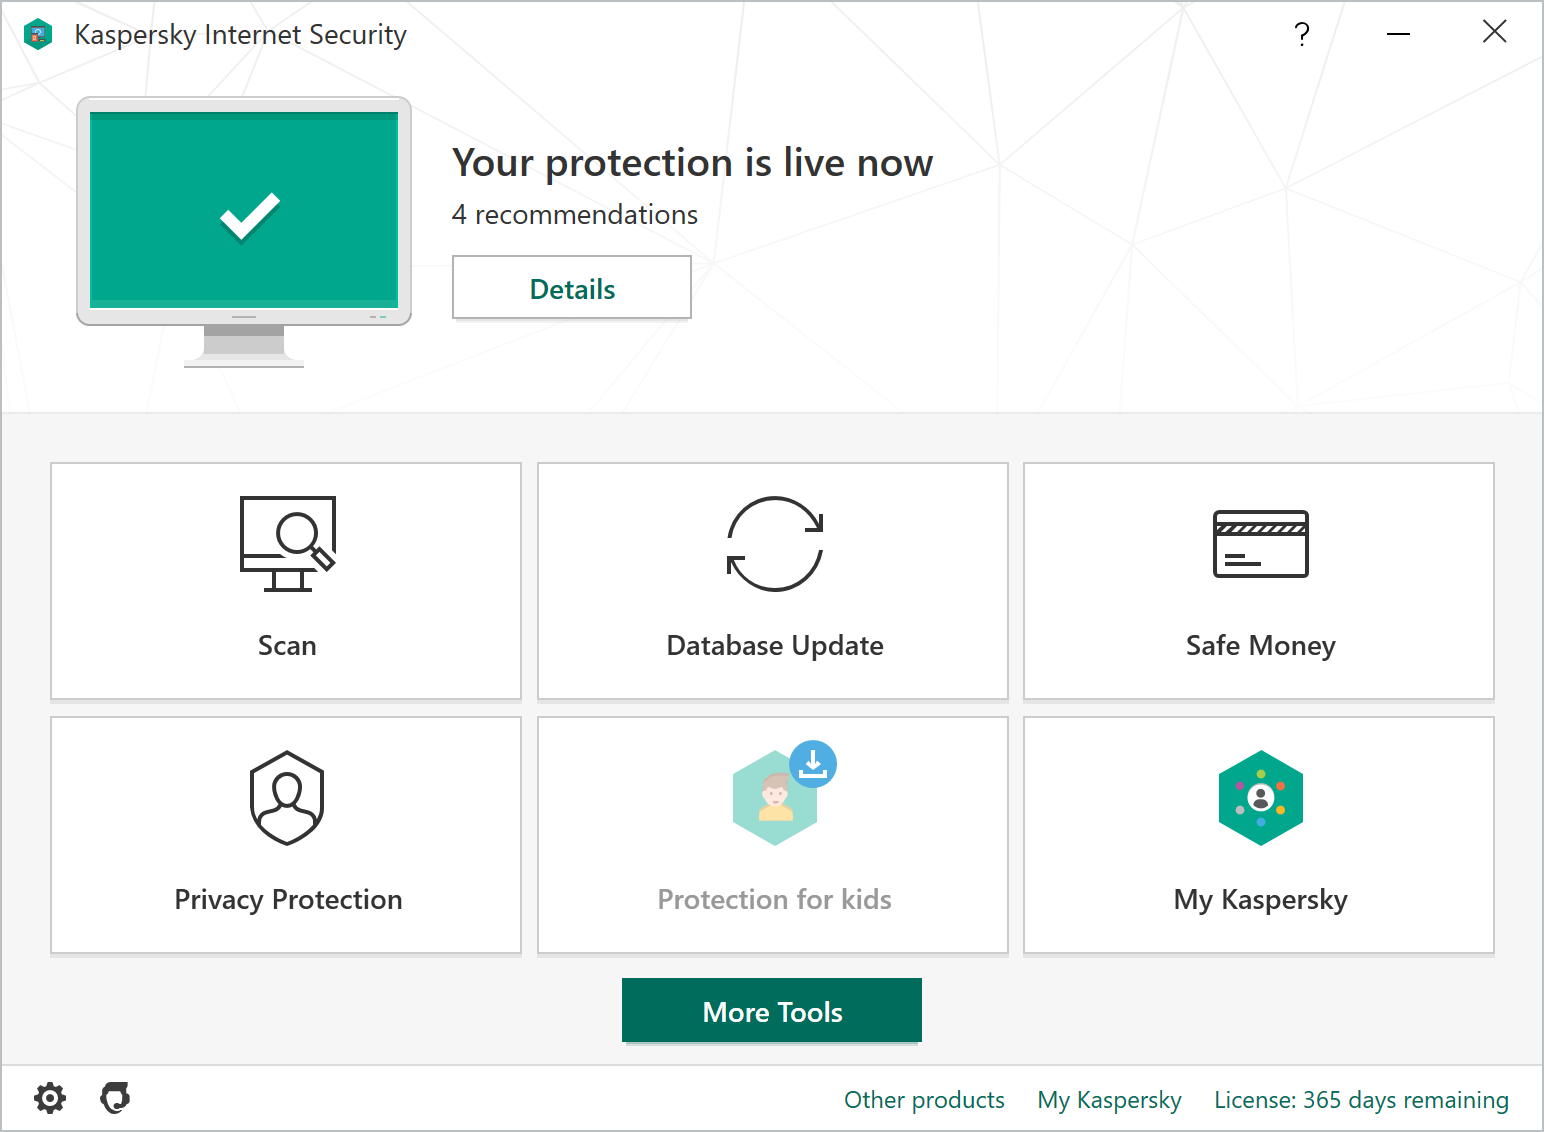 kaspersky internet security 2020 free download full version with key